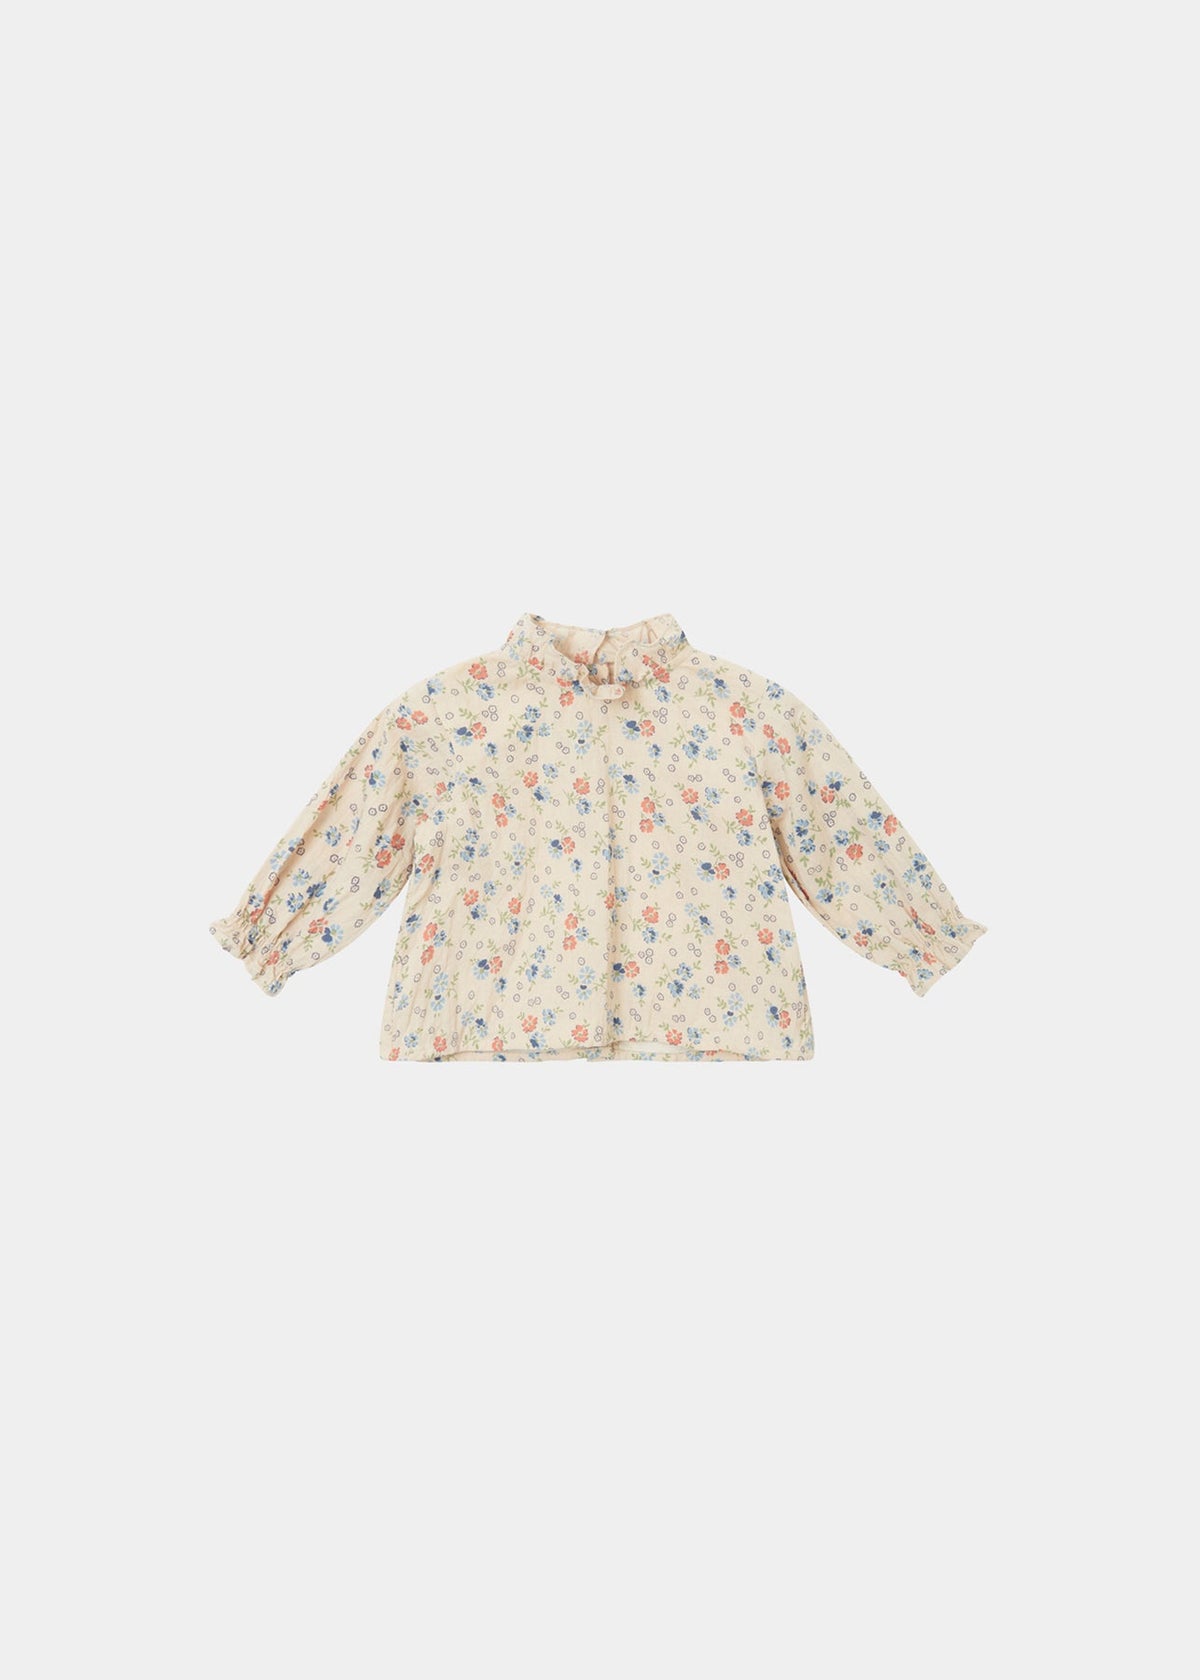 AMICA BABY BLOUSE - FLORAL PRINT